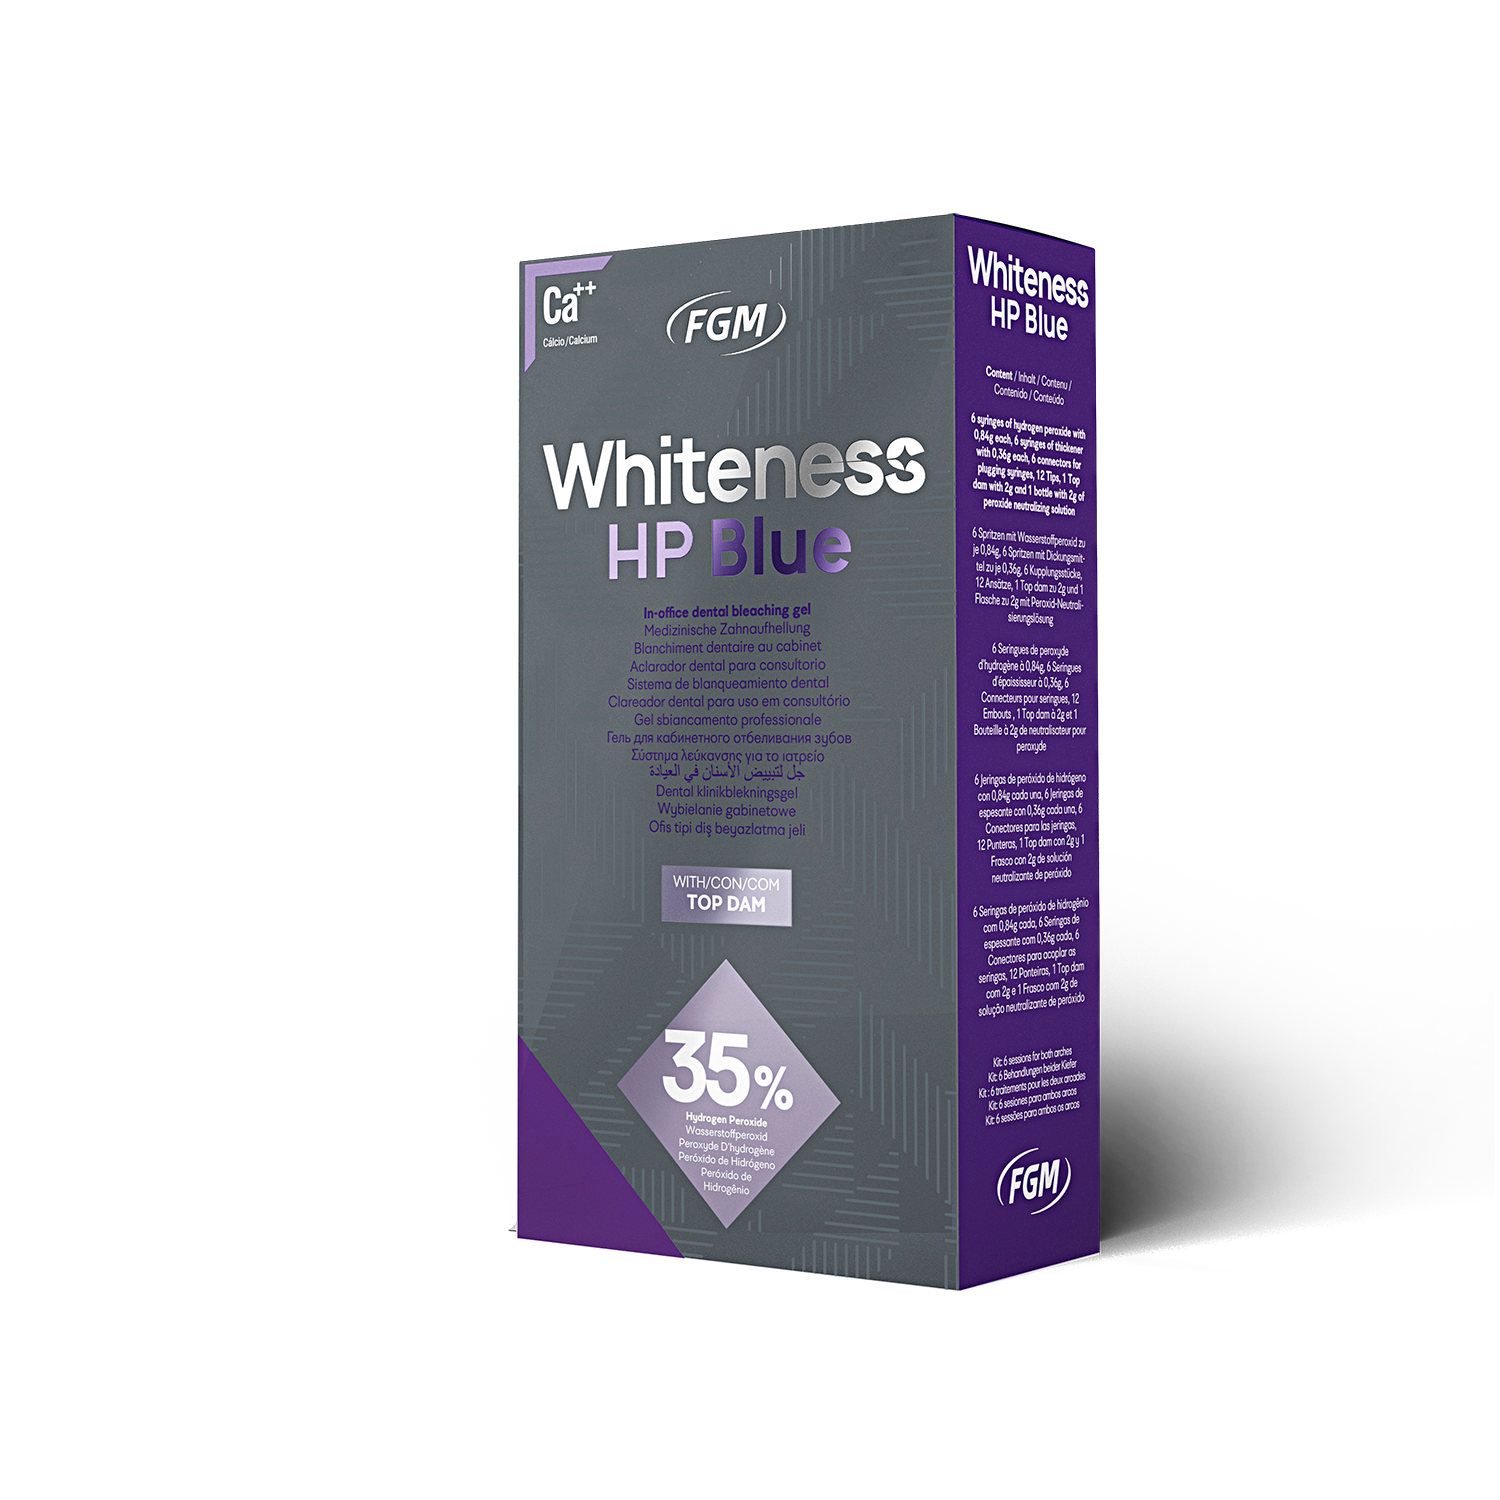 Blanqueamiento Whiteness MINI KIT HP BLUE 35% (1 paciente)